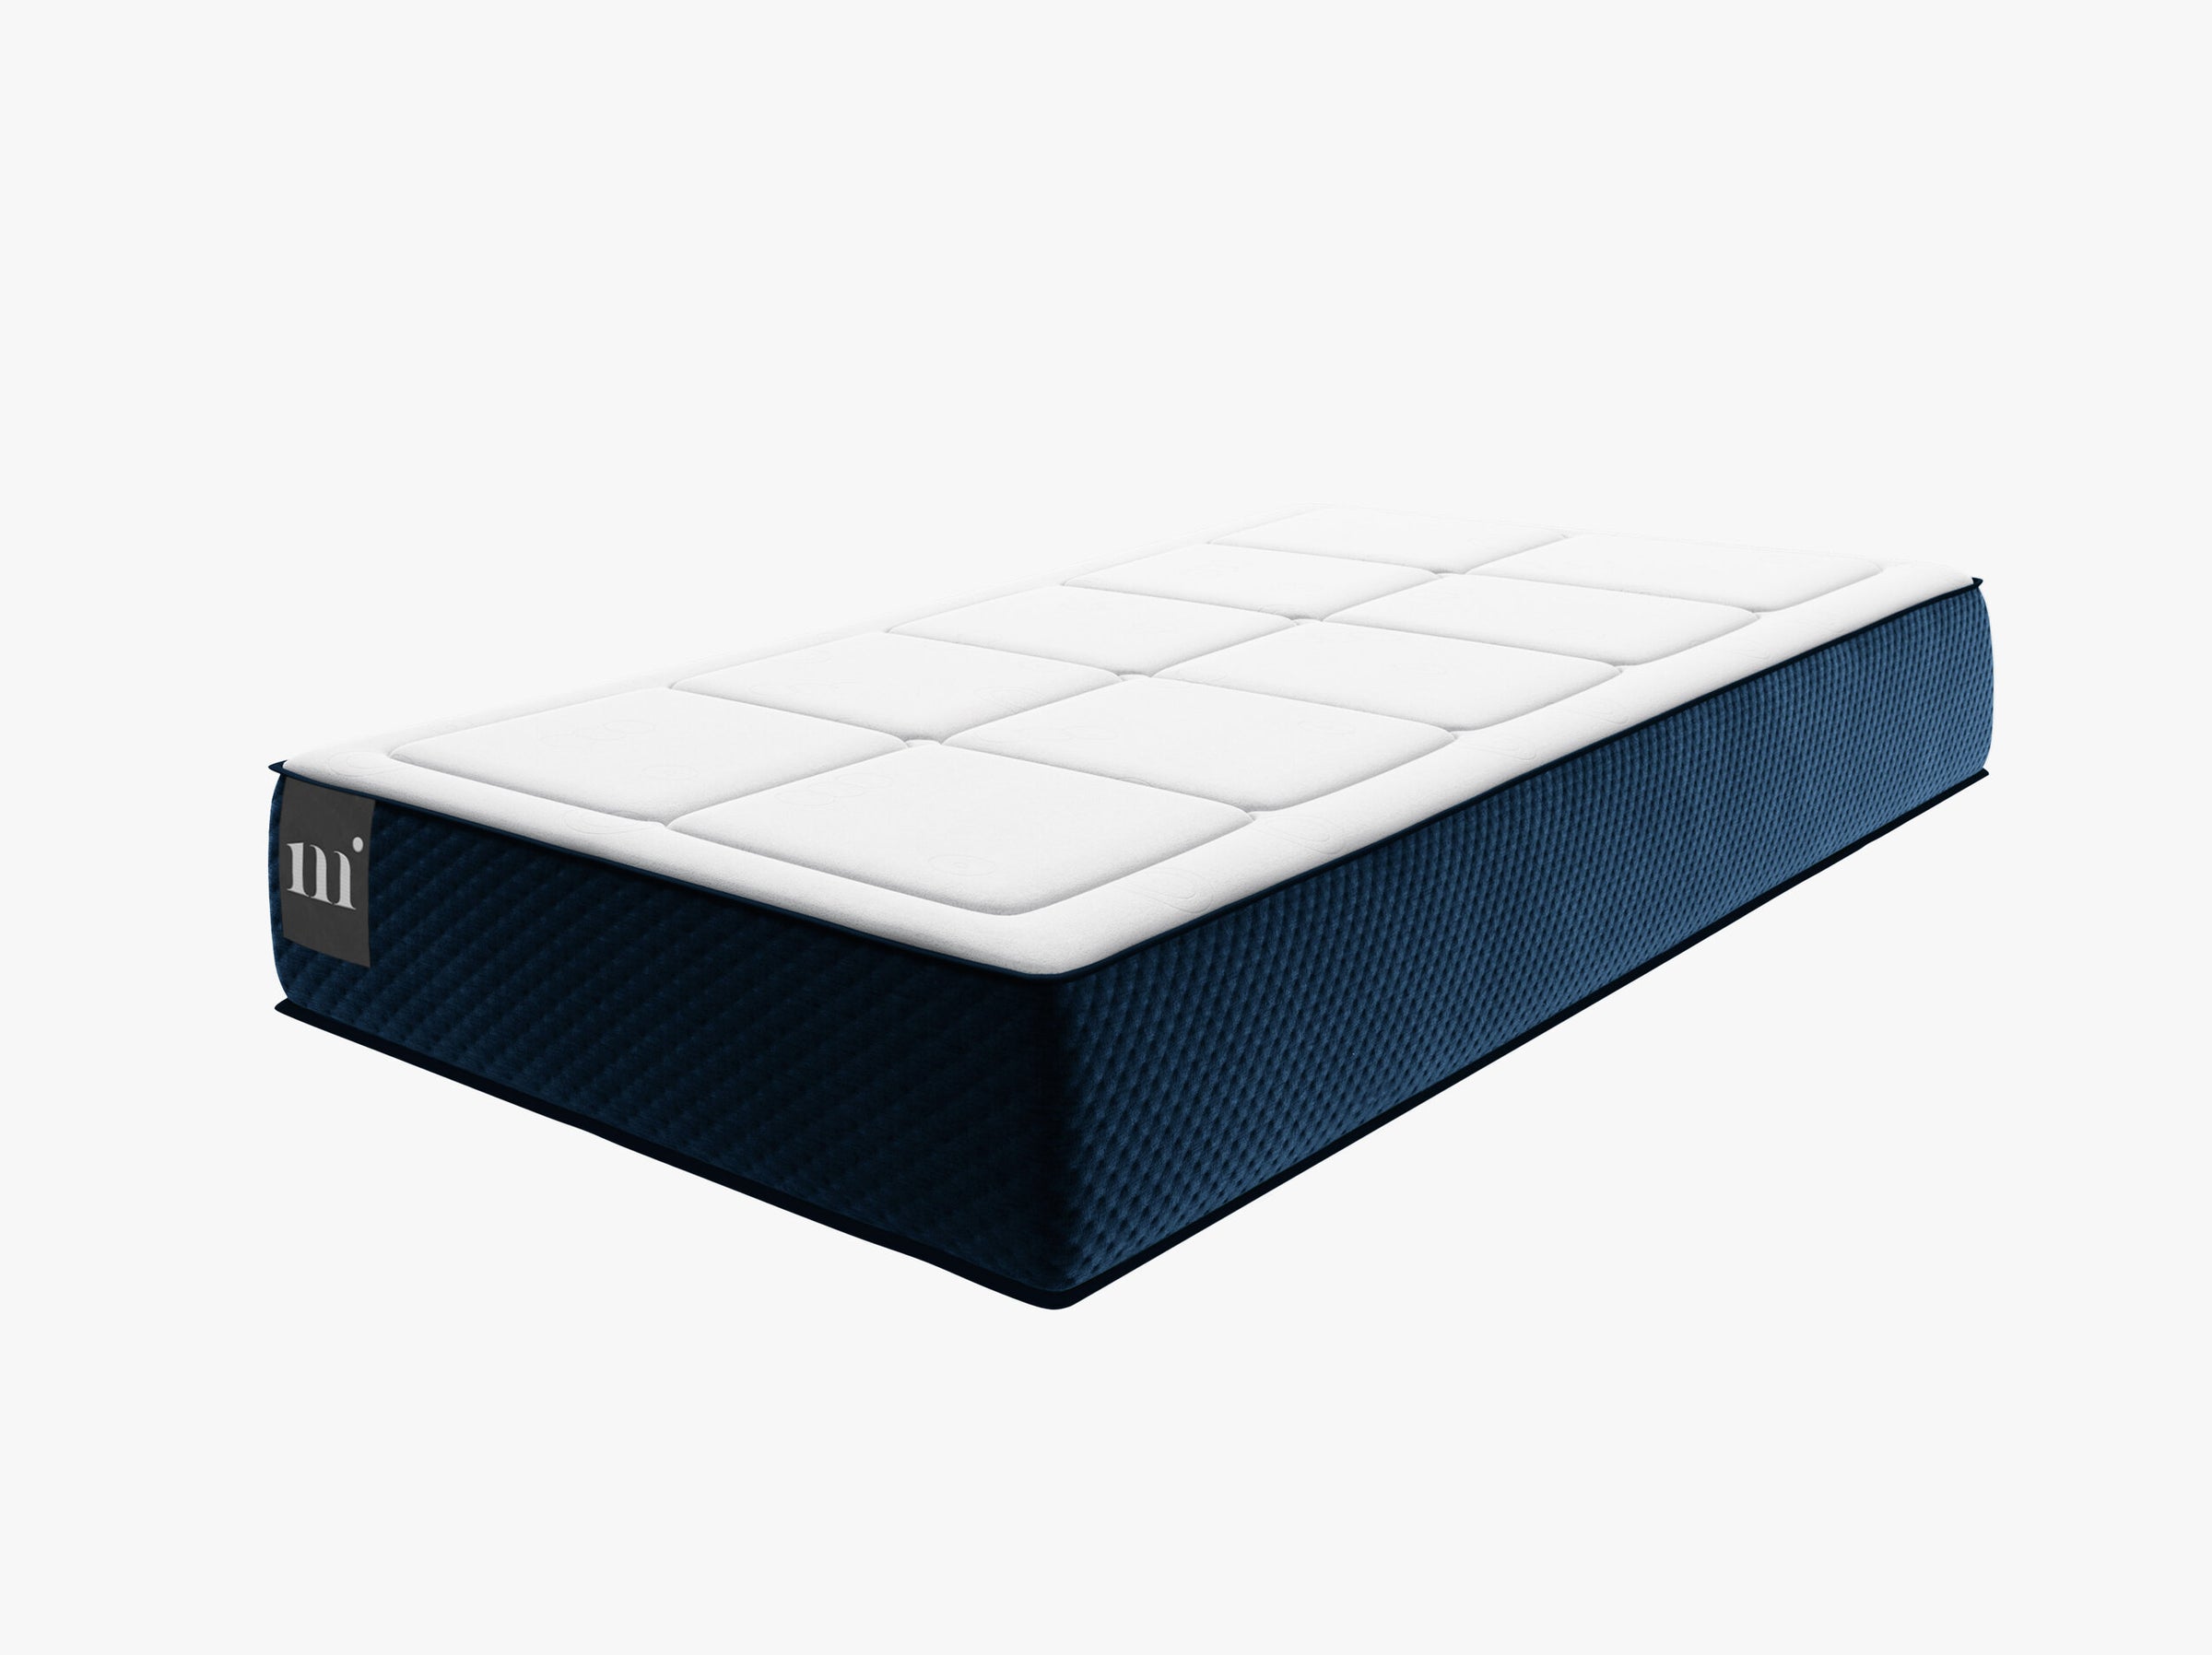 Sidi beds & mattresses structured fabric white and blue